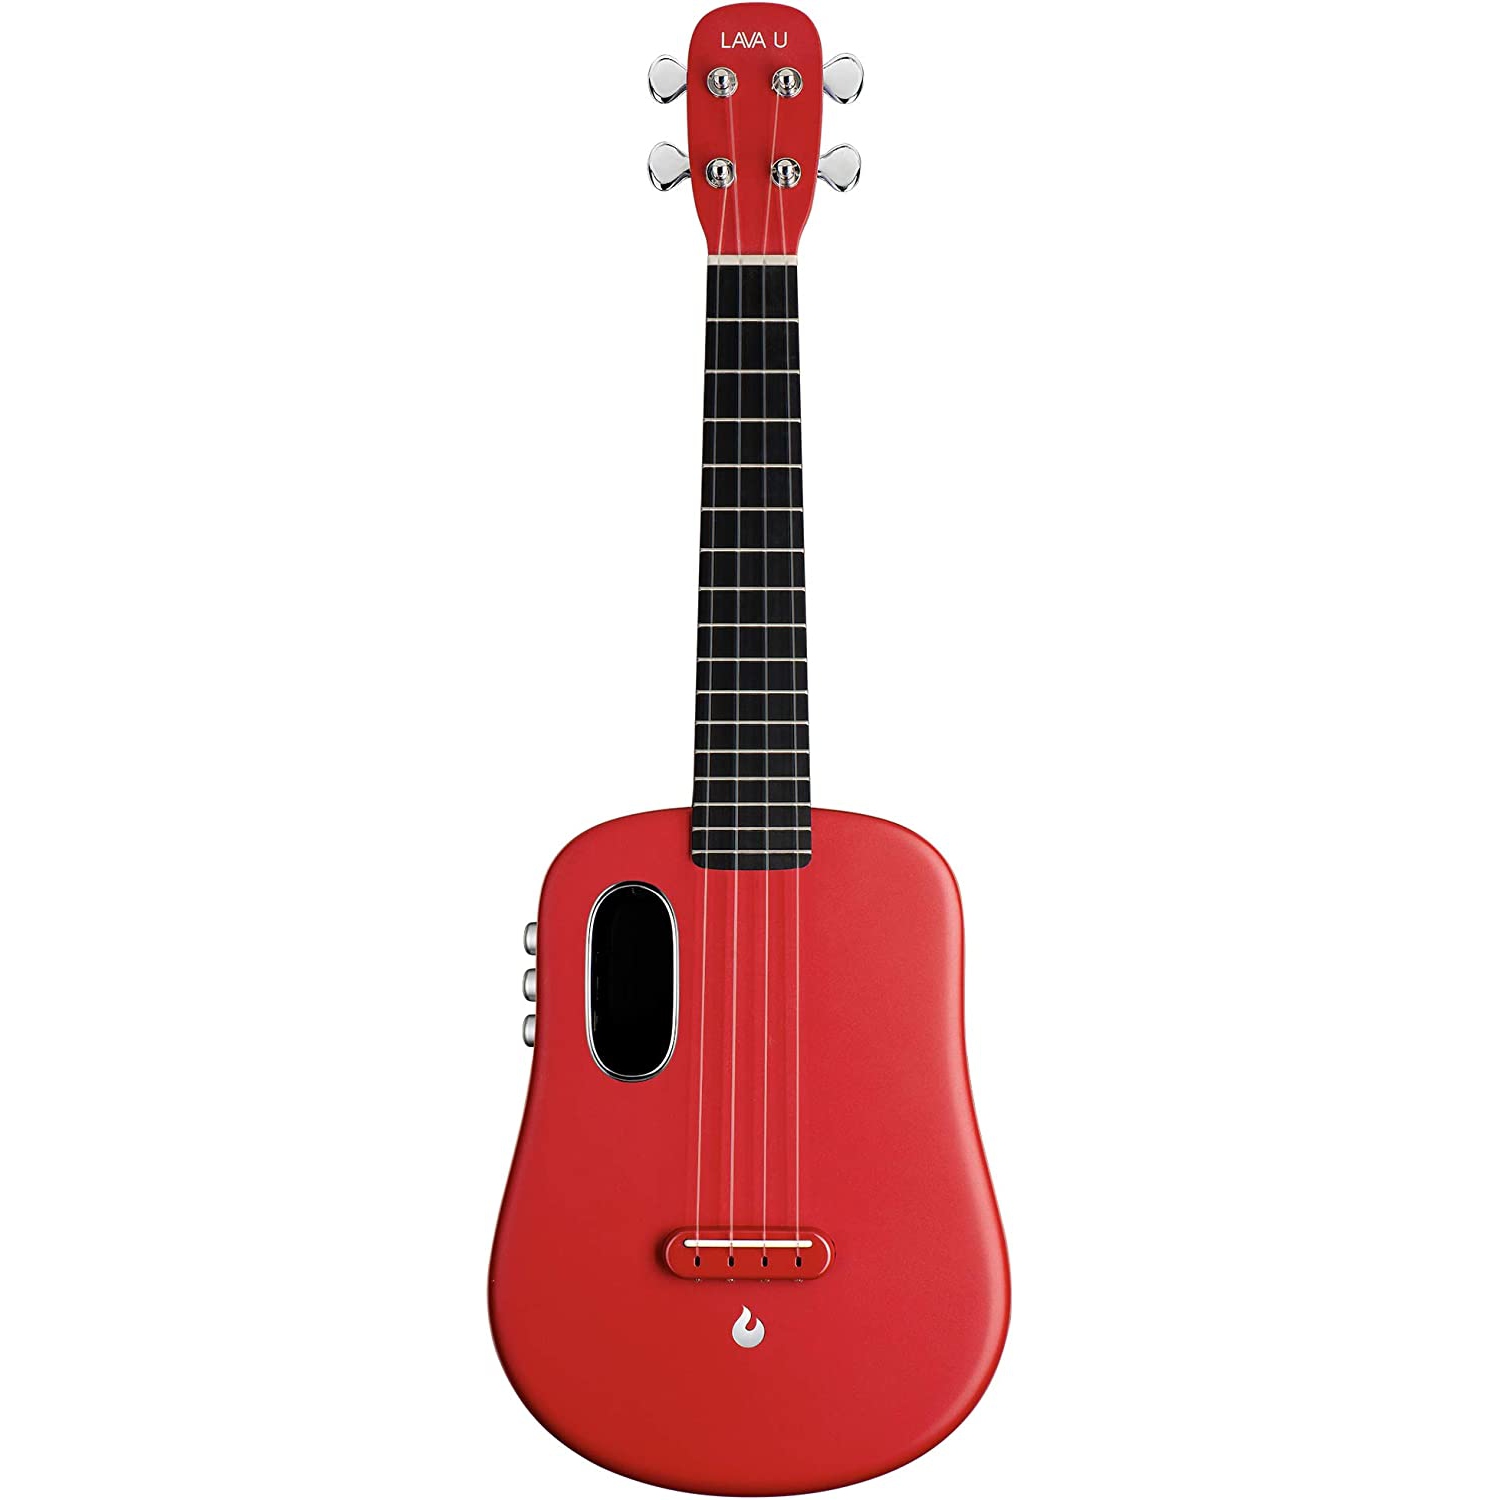 Open Box - LAVA U Carbon Fiber Ukulele with Effects Concert Travel Ukulele with Case Pick and Charging Cable (FreeBoost, Sparkle Red, 23-inch)